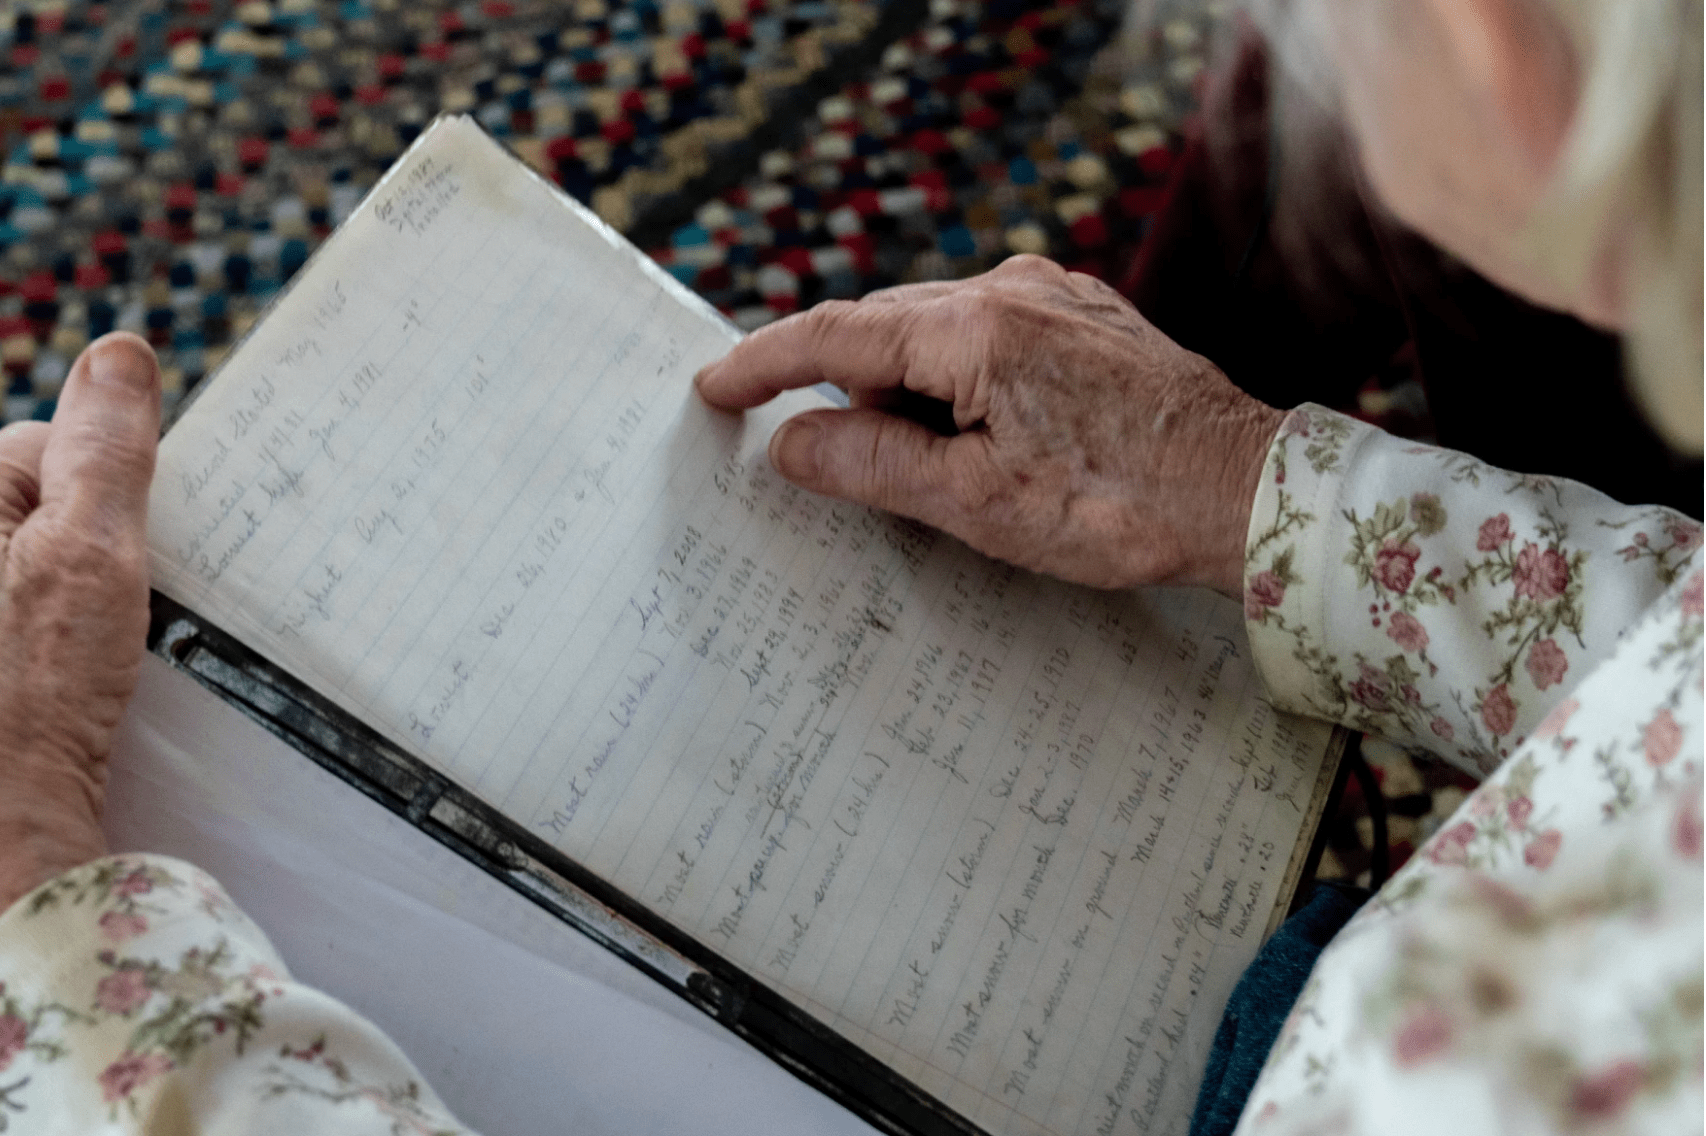 Arlene Cole can tell you the weather for each day as far back as 1957. That's when she started a personal diary with her observations. (Rebecca Conley/Maine Public)